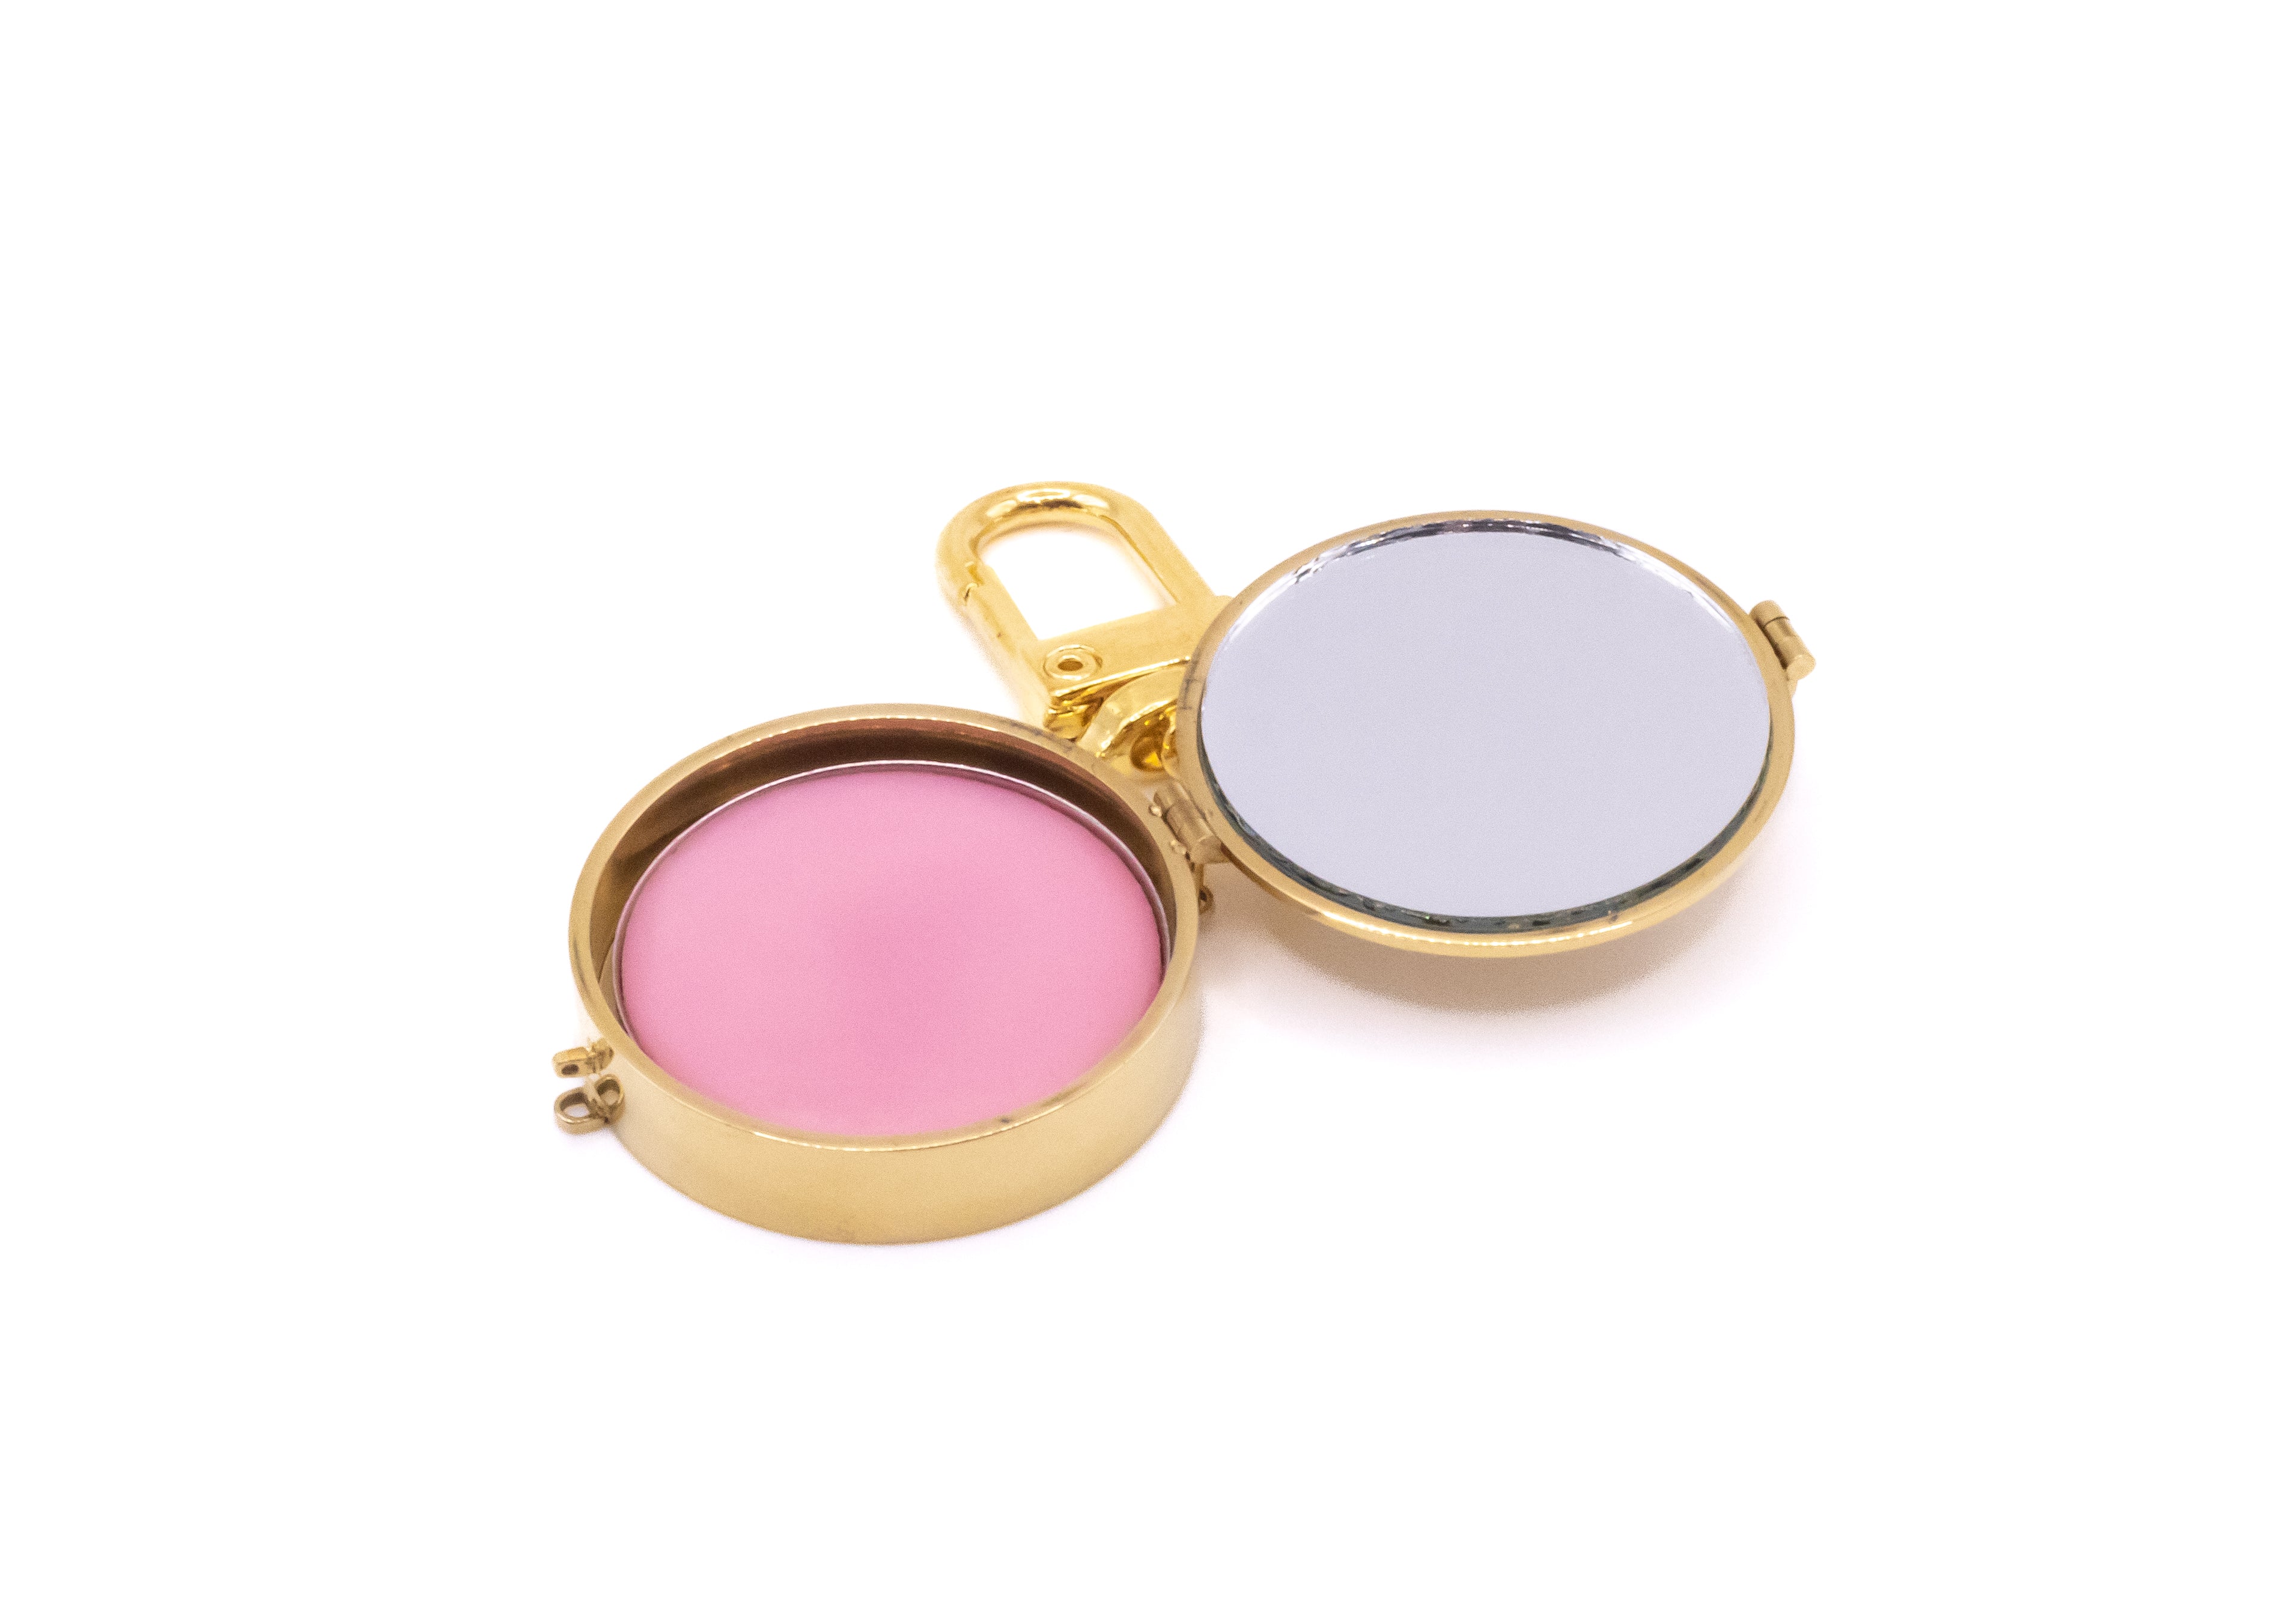 Mother of Pearl Lip Balm Key Ring in 14K Gold - getbalmy